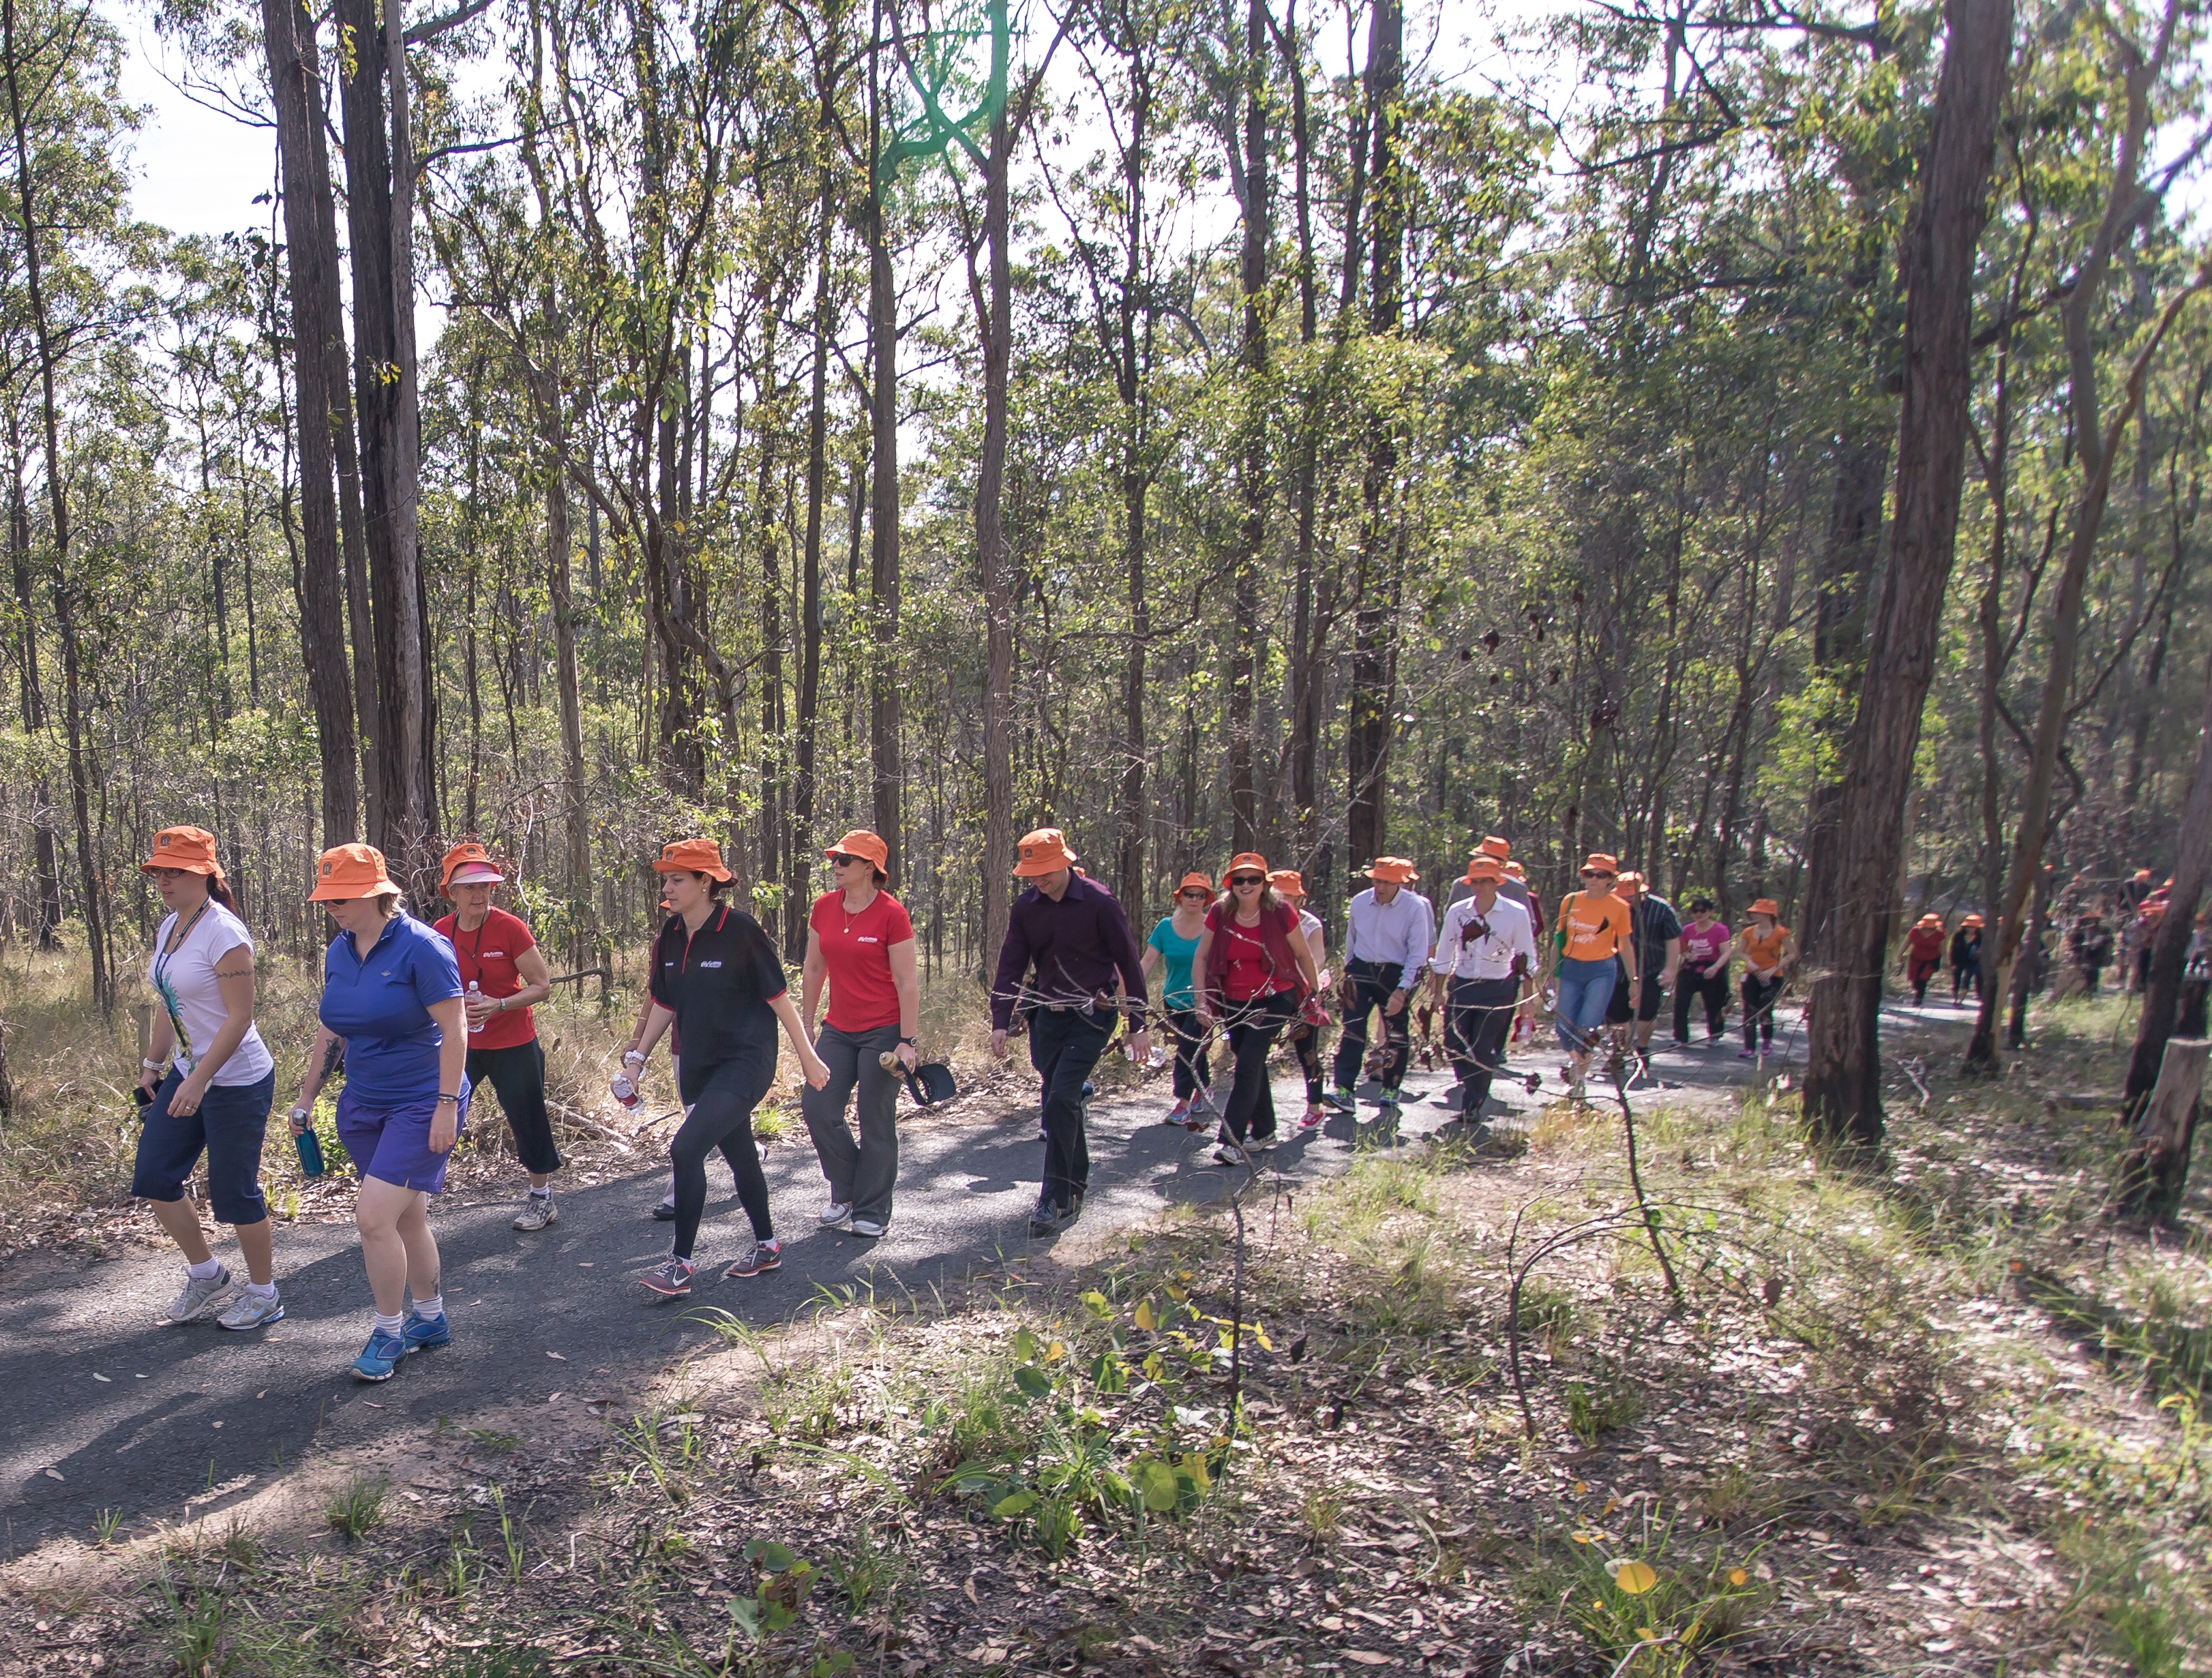 Griffith University will host a Walk and Talk event through local bushland to mark National Reconciliation Week 2017.